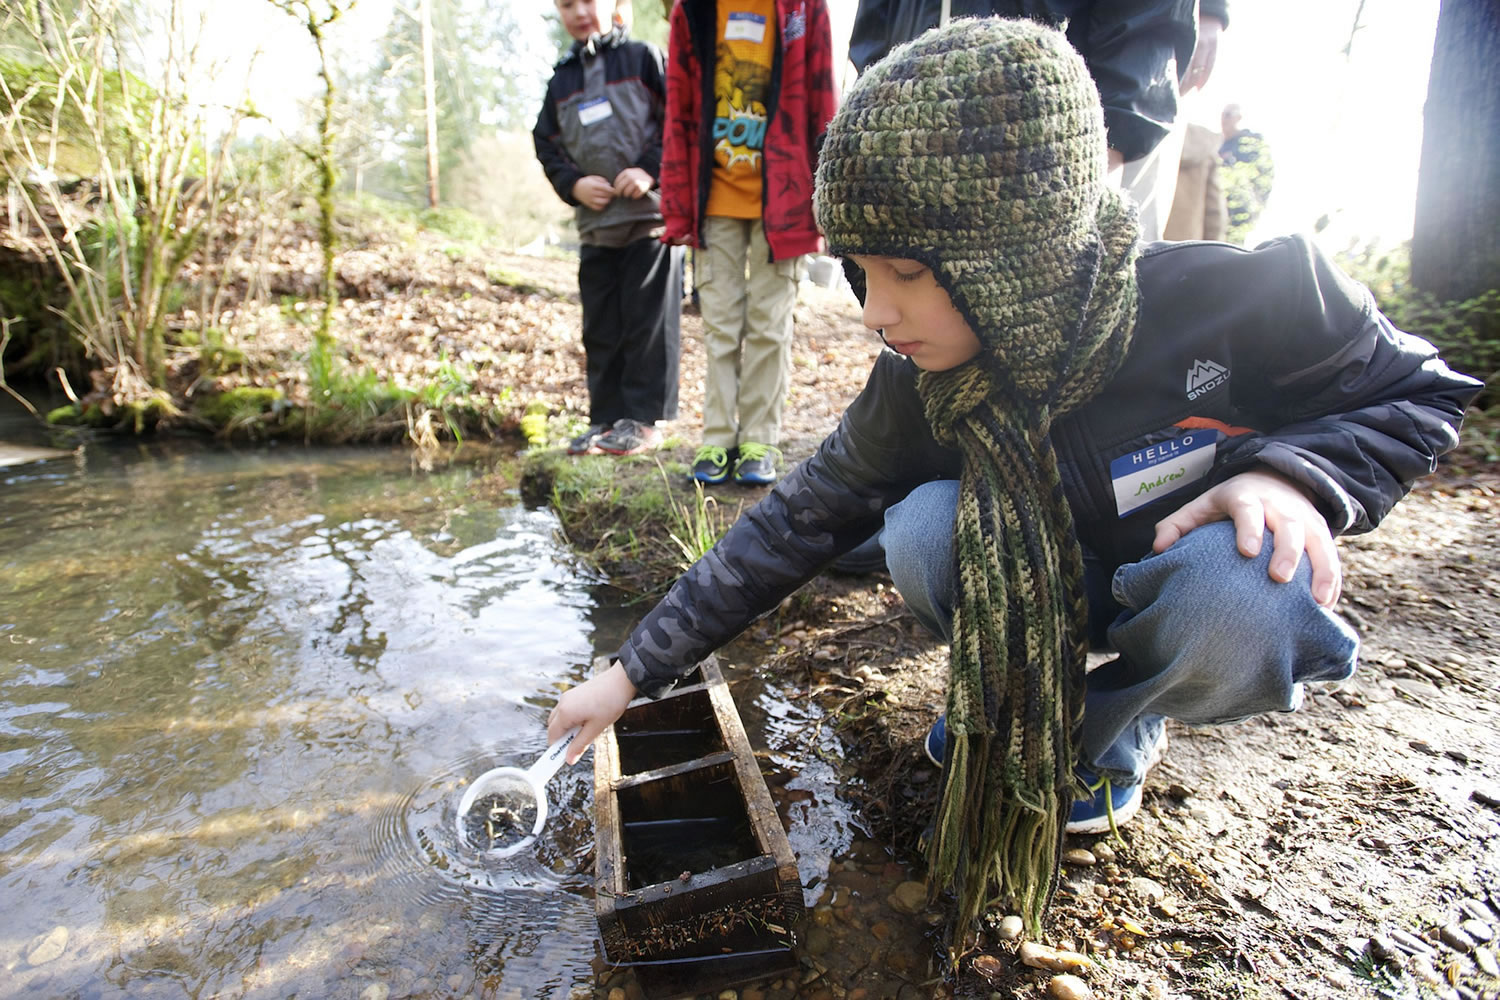 Andrew Swatosh, 10, a fourth-grader at Hockinson Heights Elementary, releases a scoop of coho salmon into Gravel Point Creek on Thursday east of Battle Ground as part of the Salmon in the Classroom program organized by the Columbia Springs Environmental Education Center.